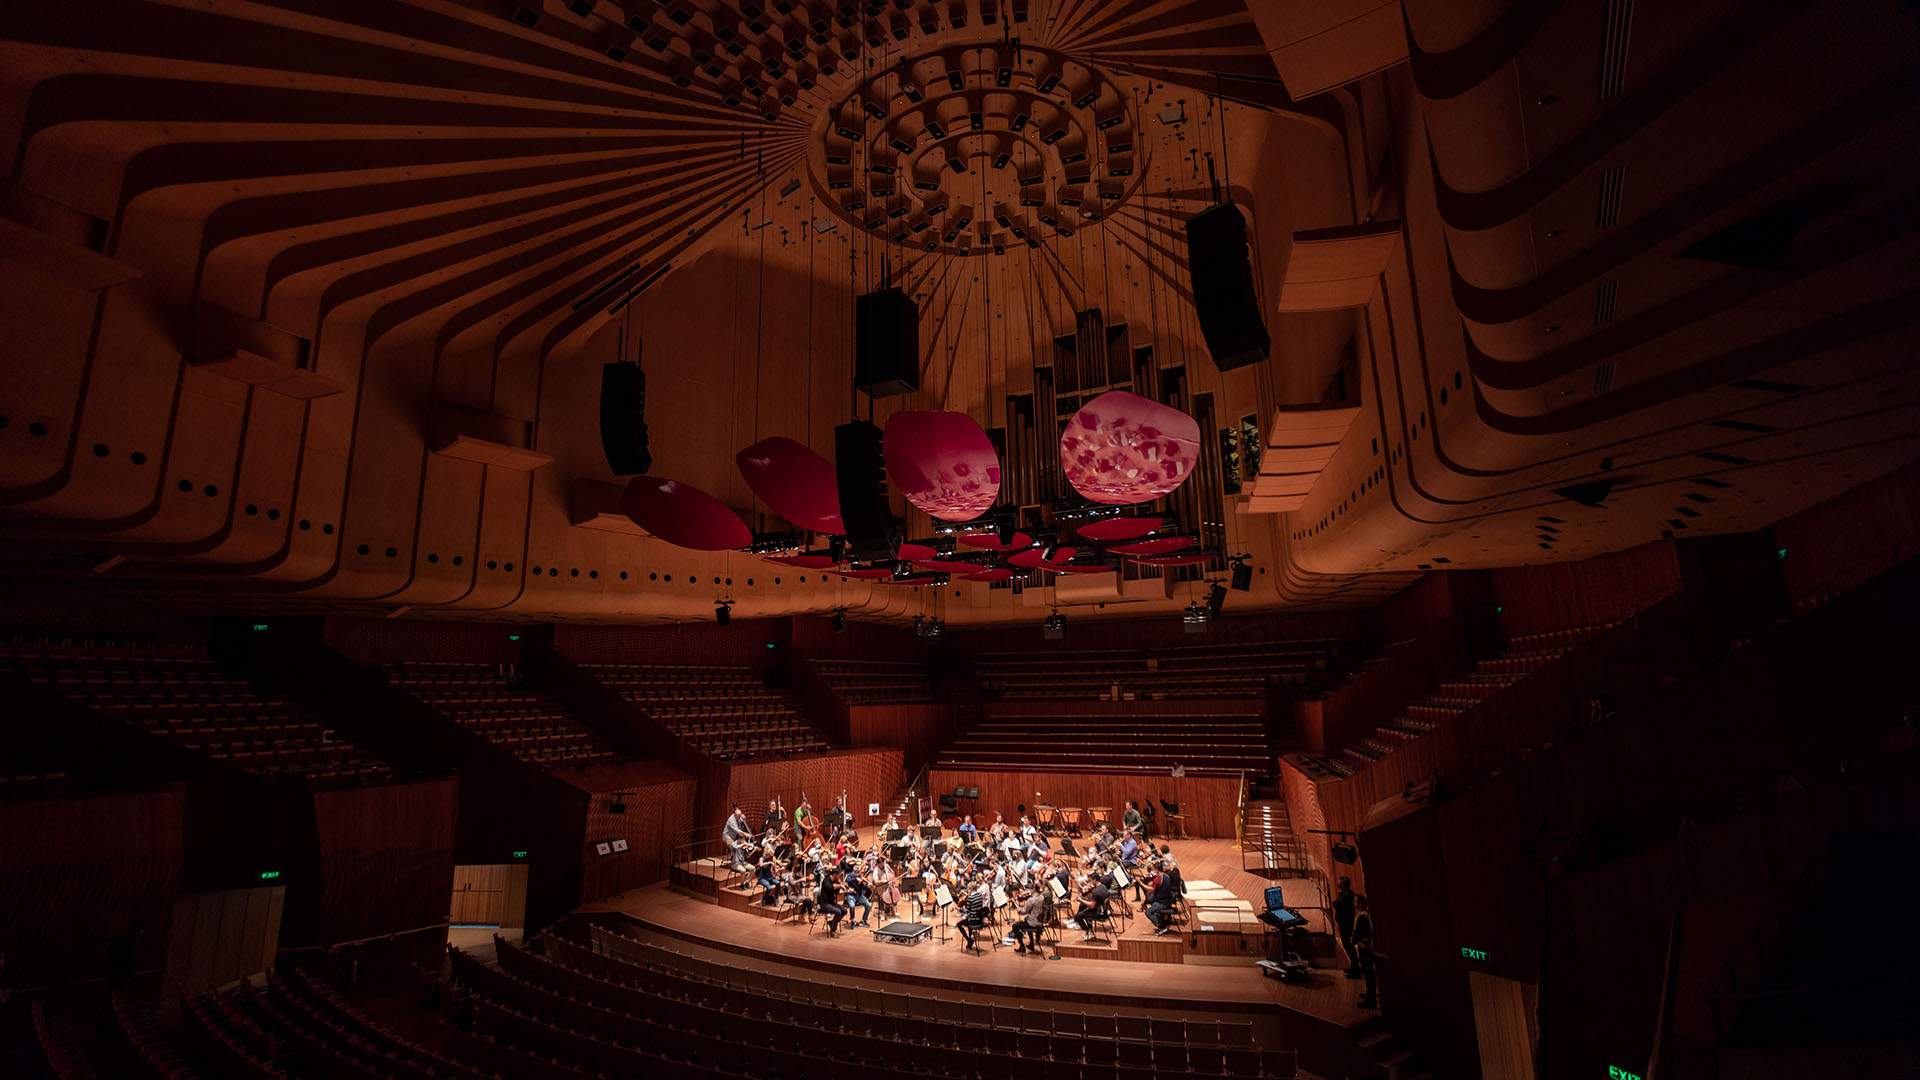 Sydney Opera House Has Unveiled Its Stunning, Two-Years-in-the-Making Concert Hall Revamp